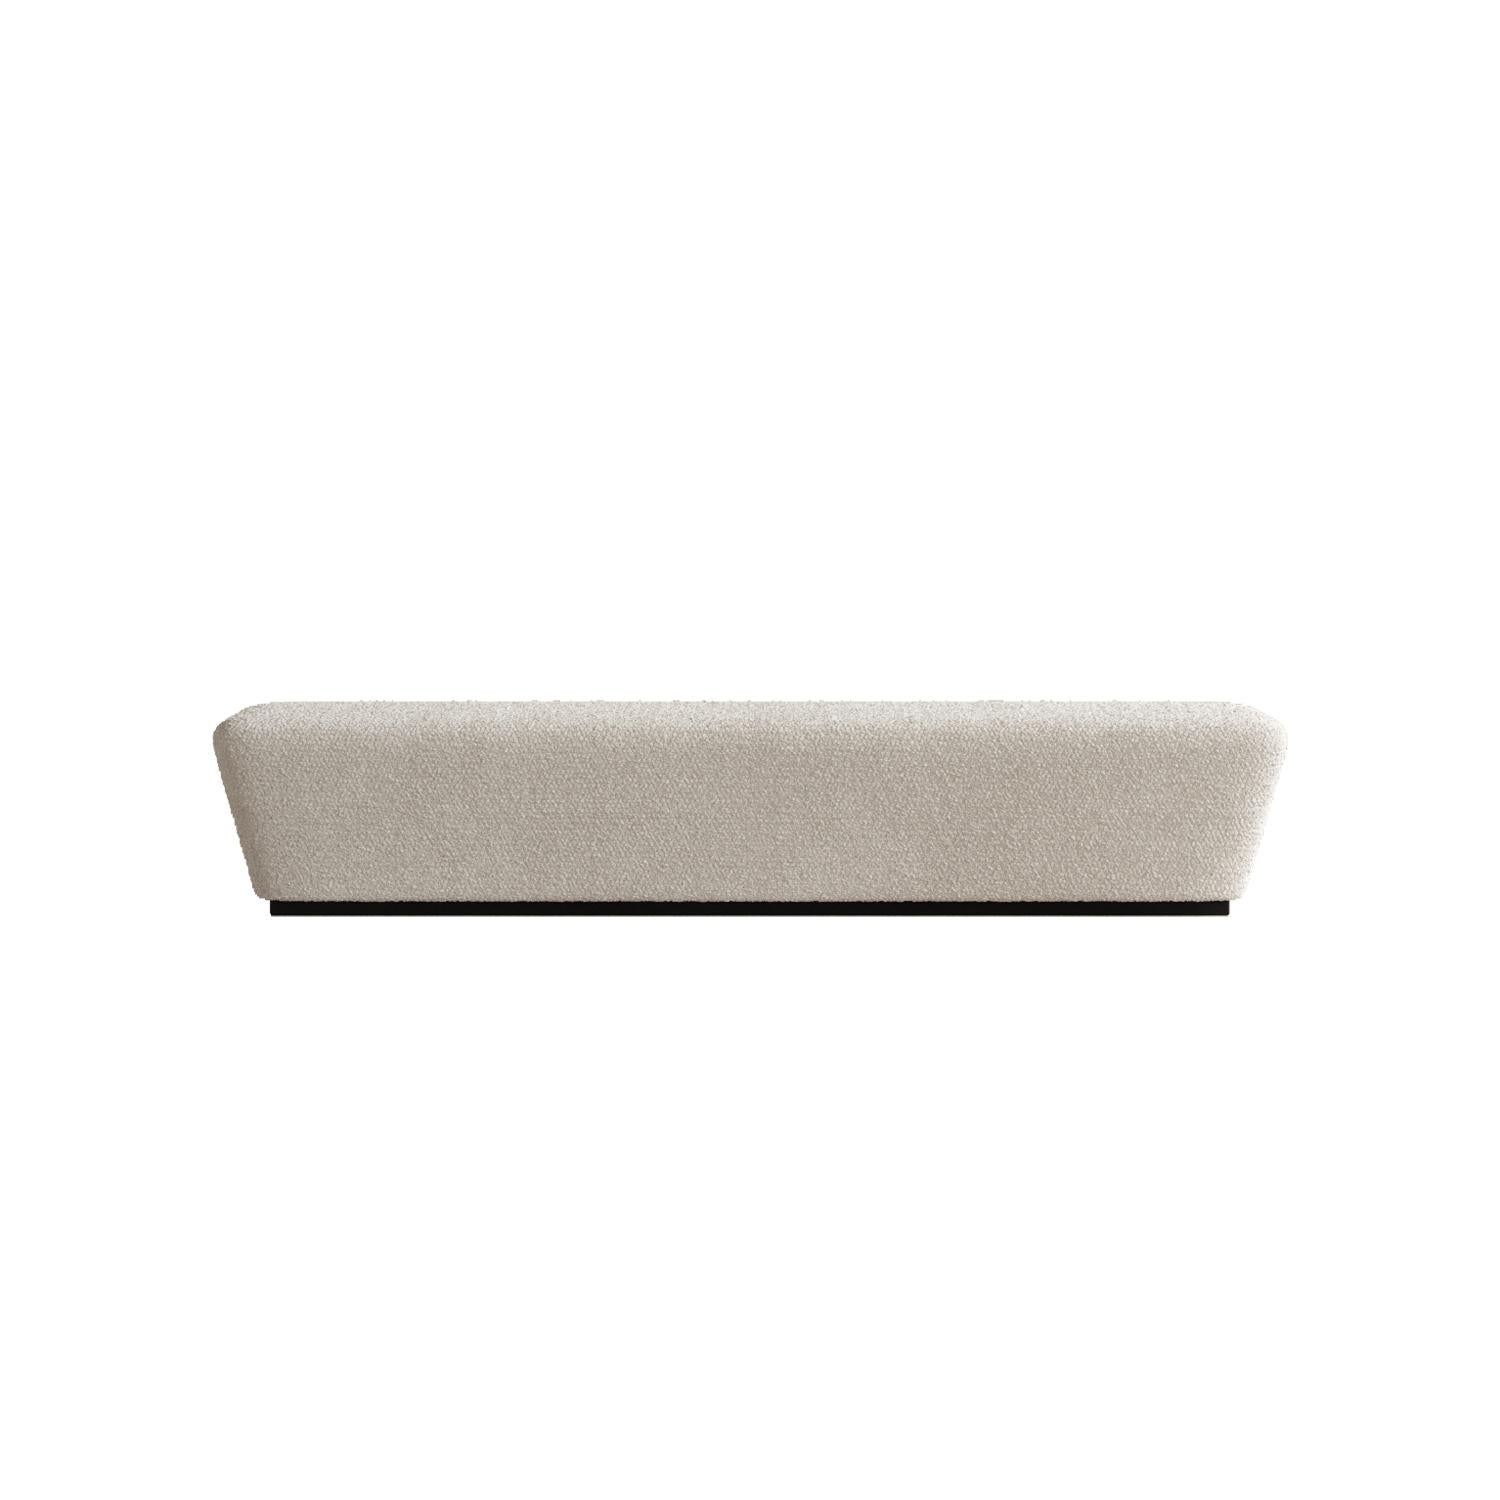 White Memory Bench by Plyus Design
Dimensions: D 42 x W 200 x H 38 cm
Materials:  Wood, HR foam, polyester wadding, fabric upholstery
Also available in a variety of colors. 

“Memory” bench.
Collection 